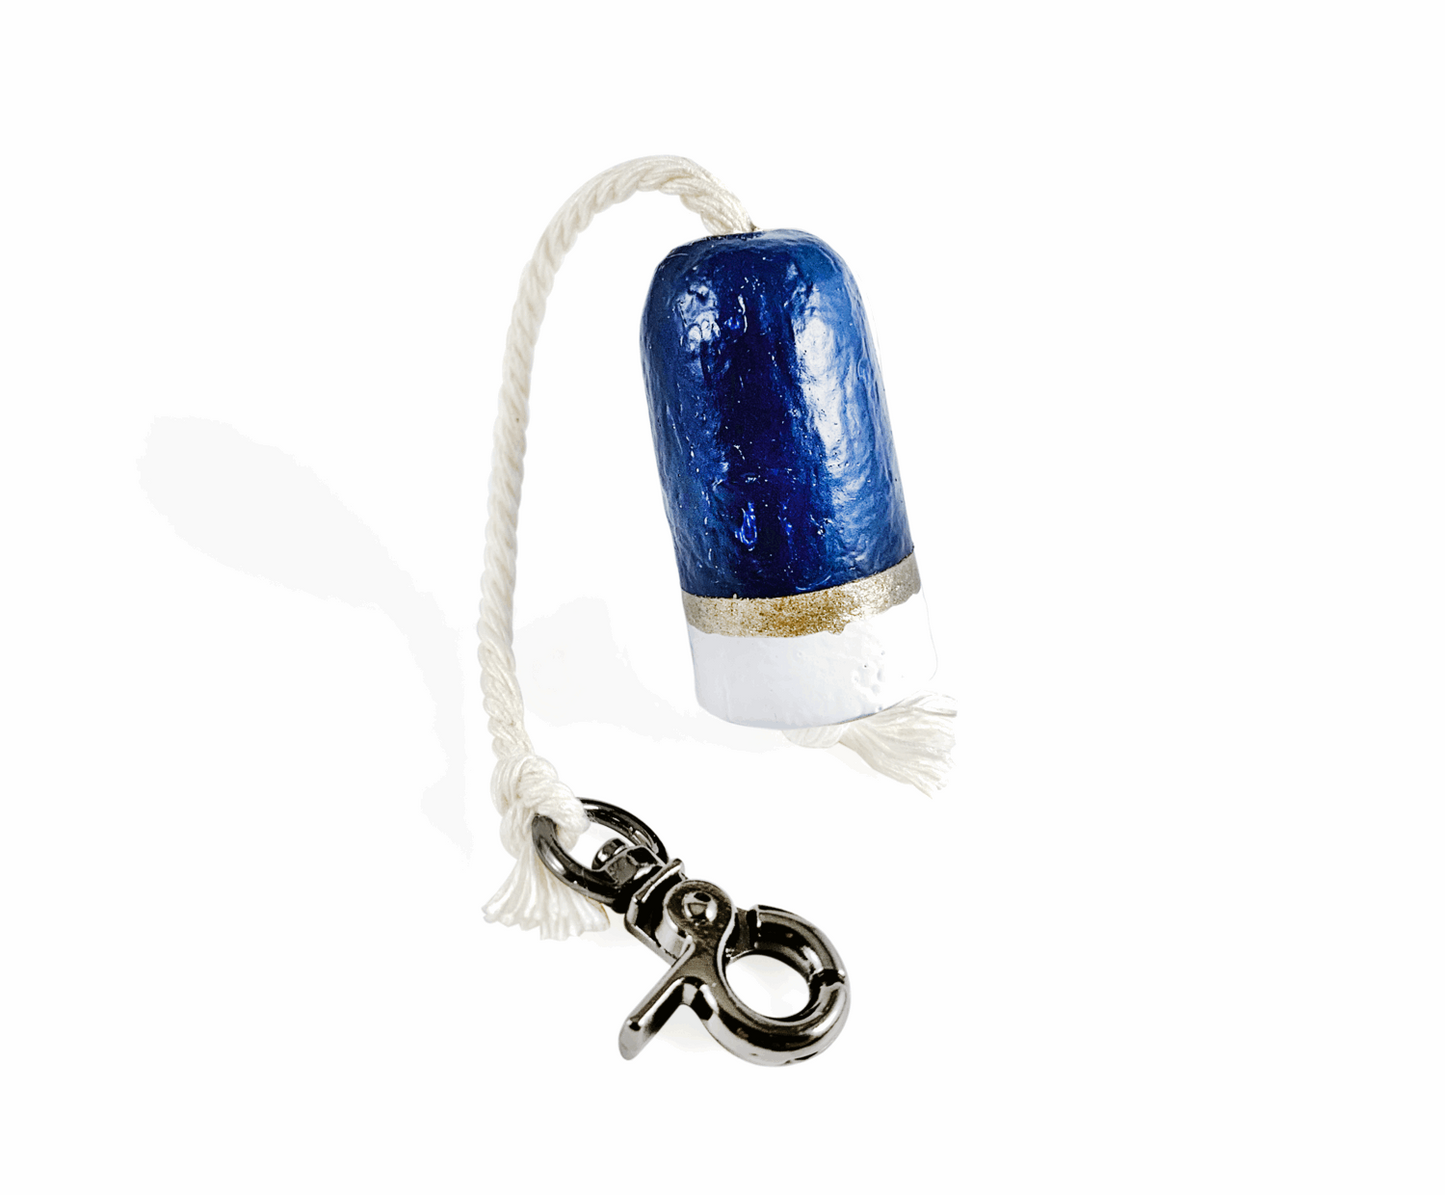 Recycled Wine Cork Buoy Lifesaver Keychains—navy with gold stripe and white bottom